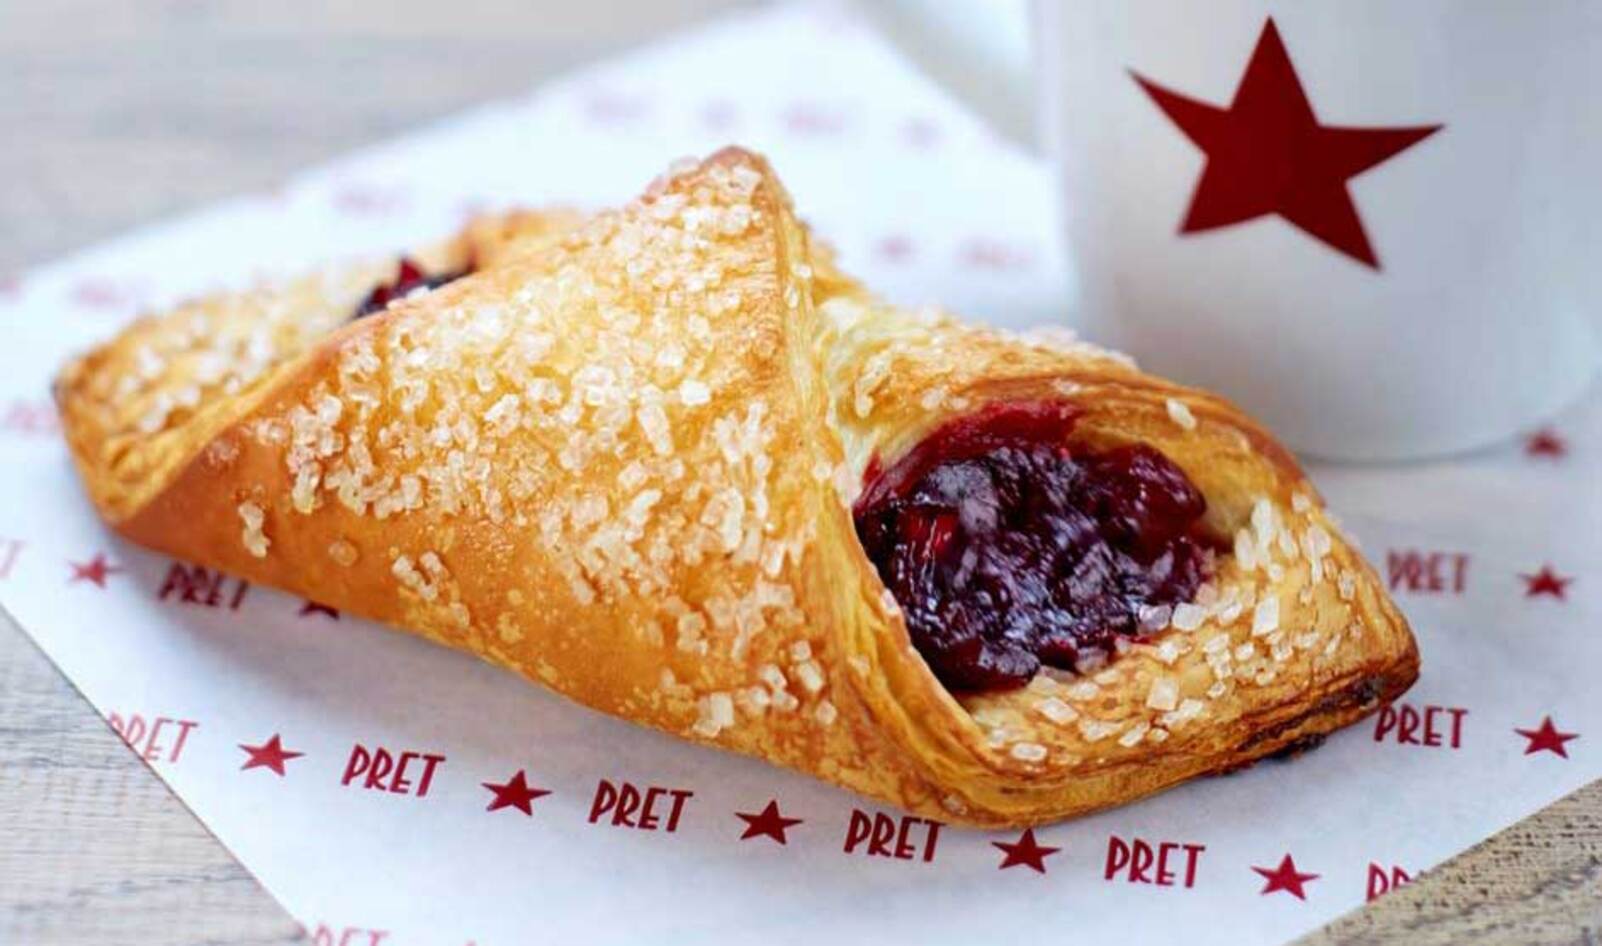 Pret A Manger Adds Vegan Bakery Counters at All Veggie Pret Outlets